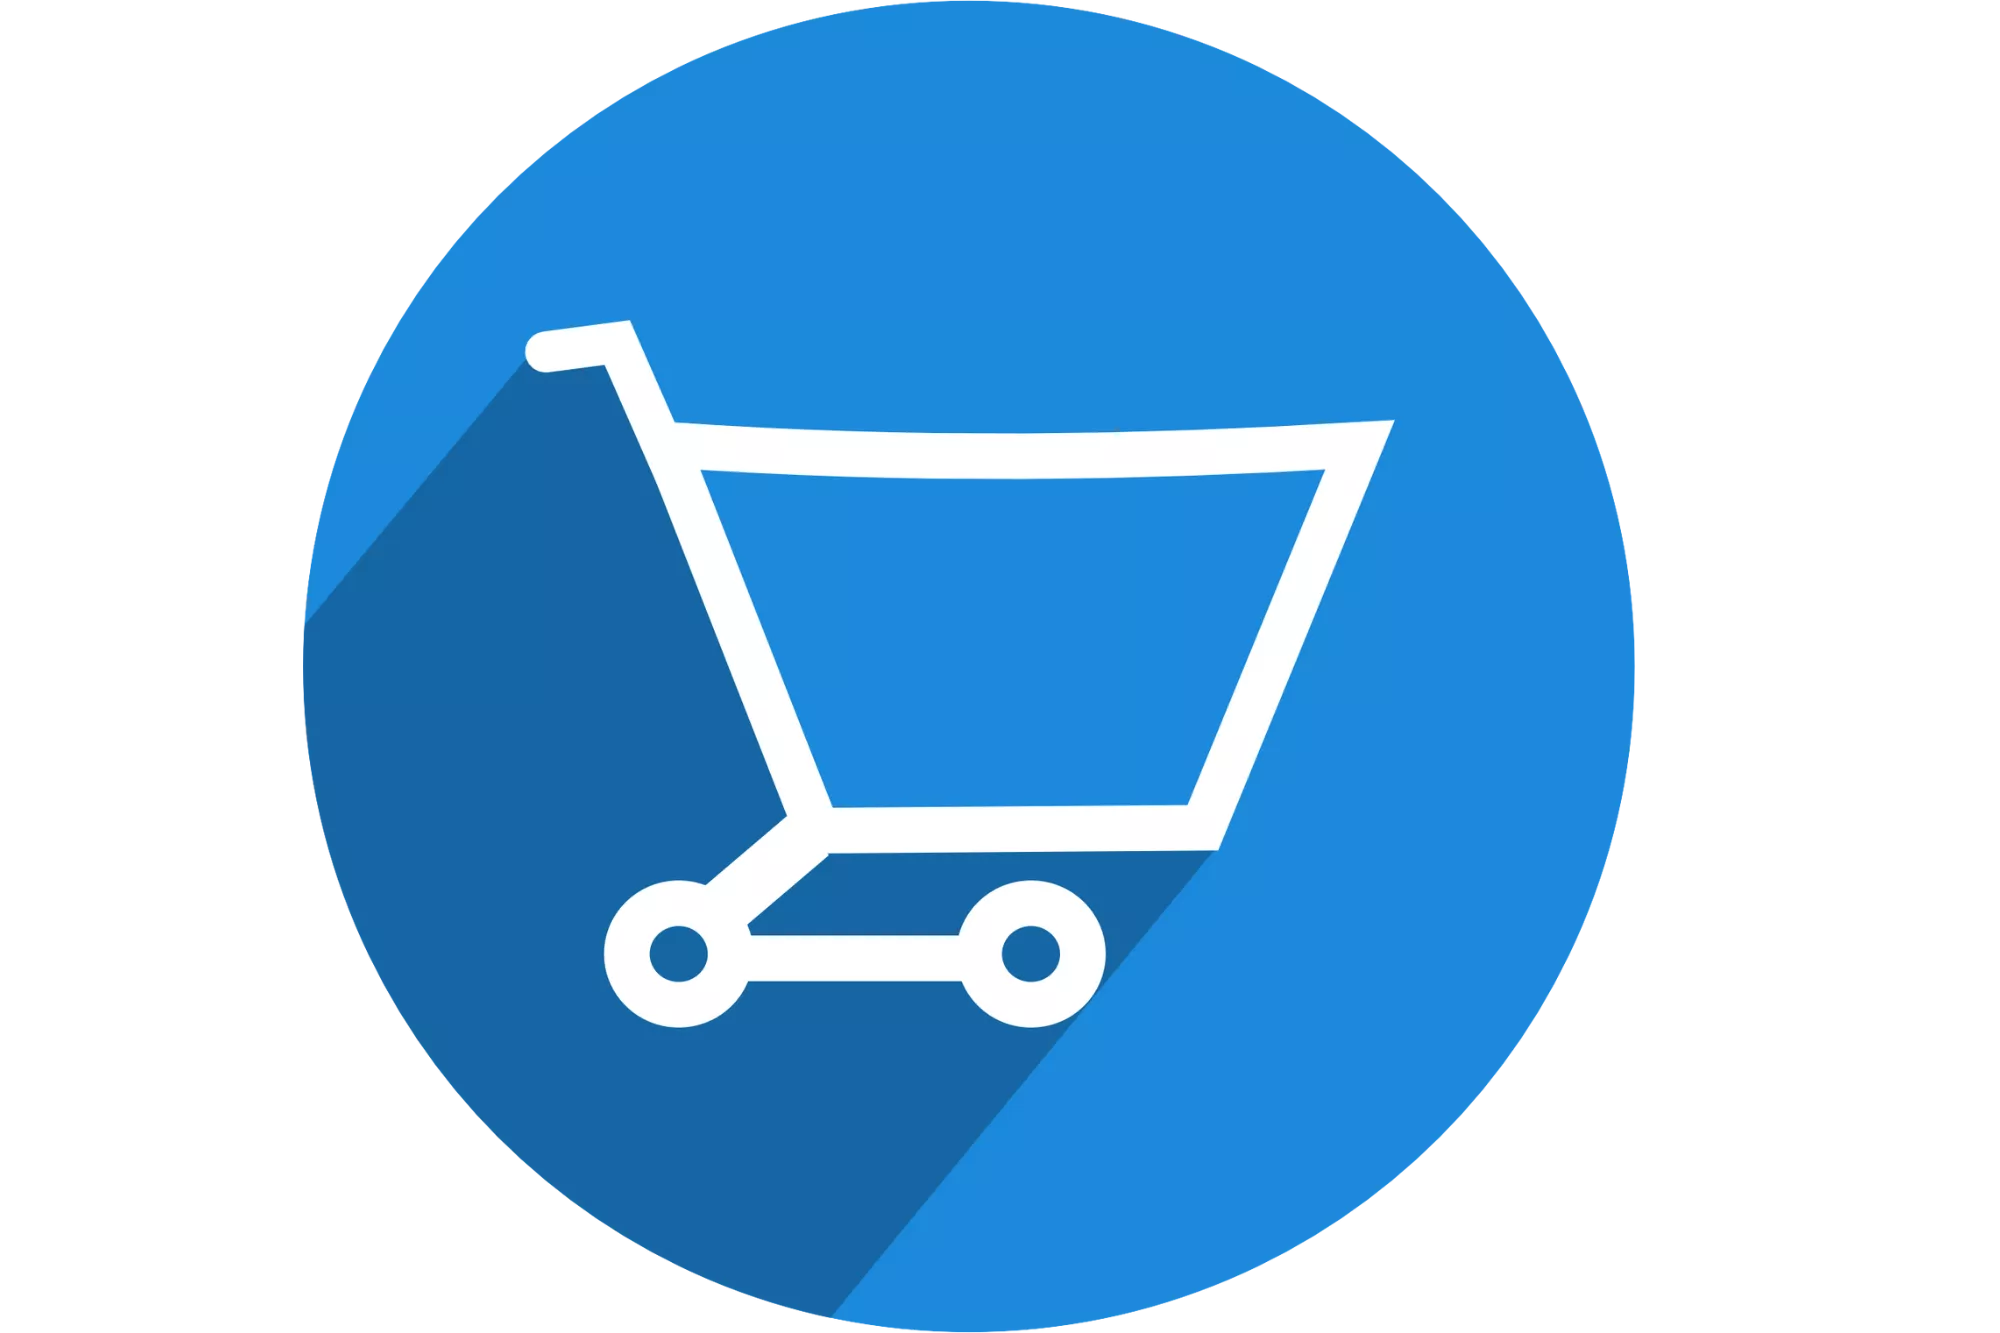 shopping cart in blue circle to represent online payment using set protocol